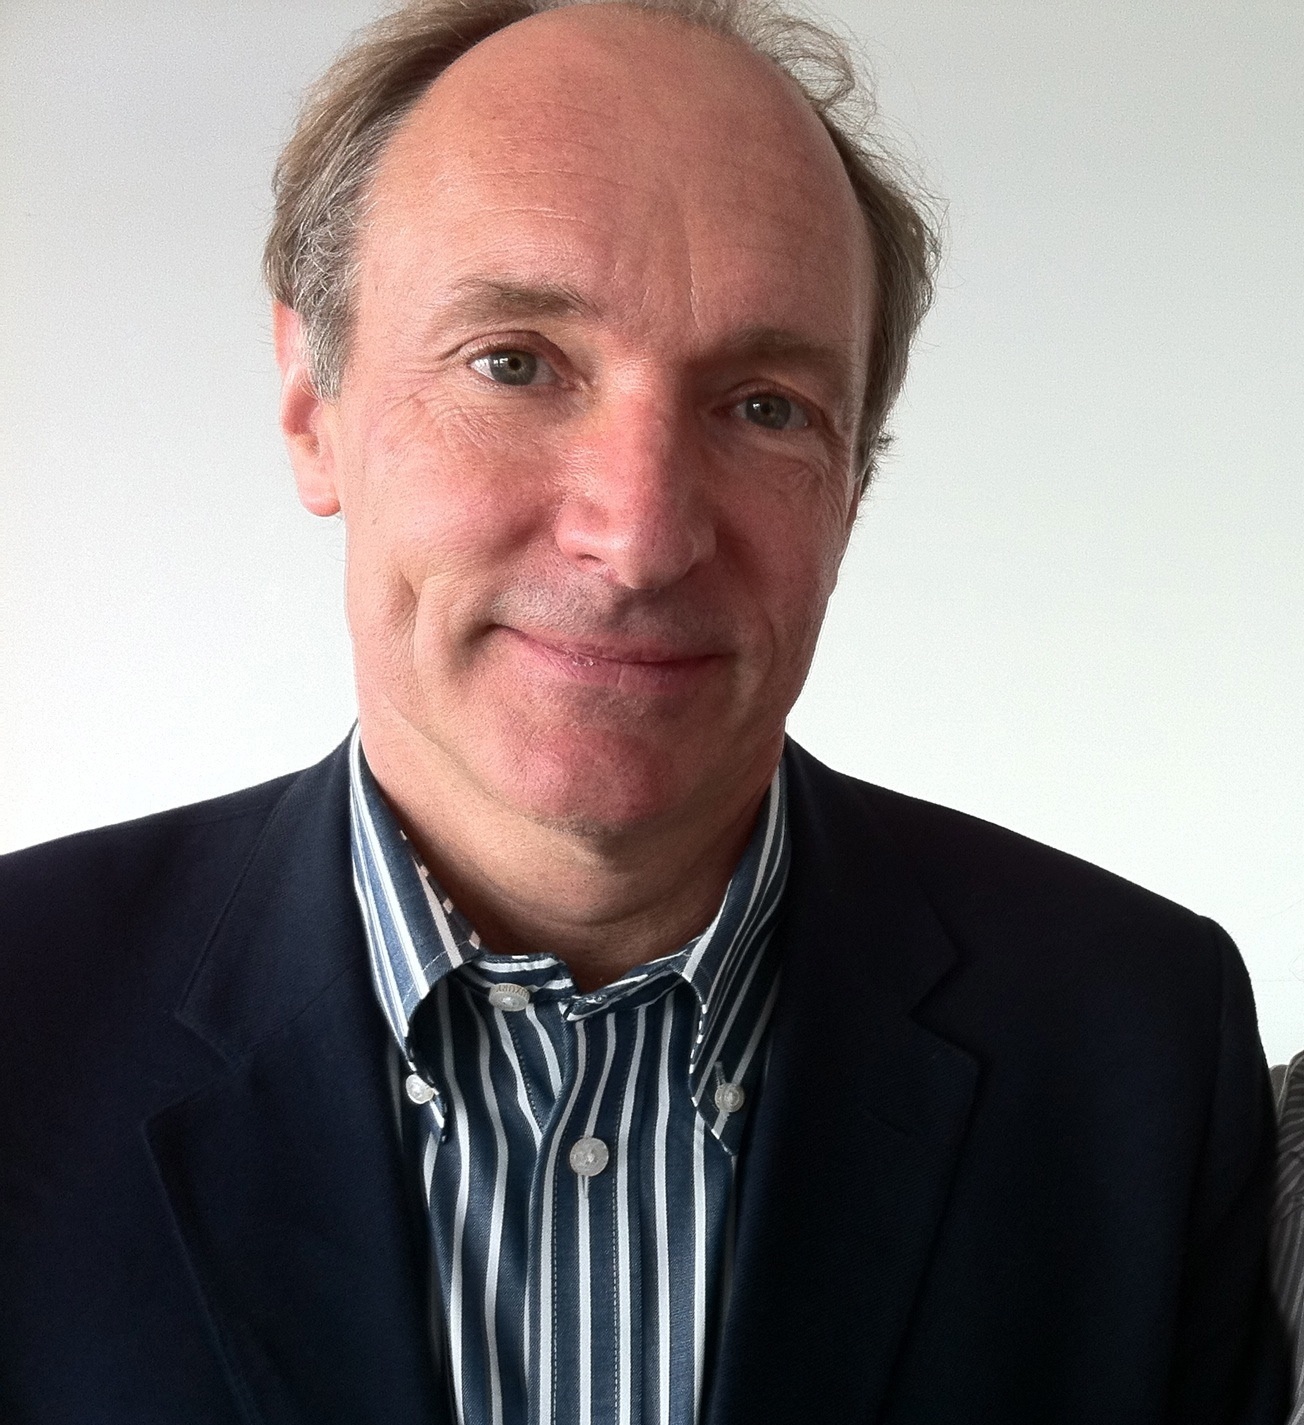 World Wide Web founder wants internet to be more accessible to those who aren't online